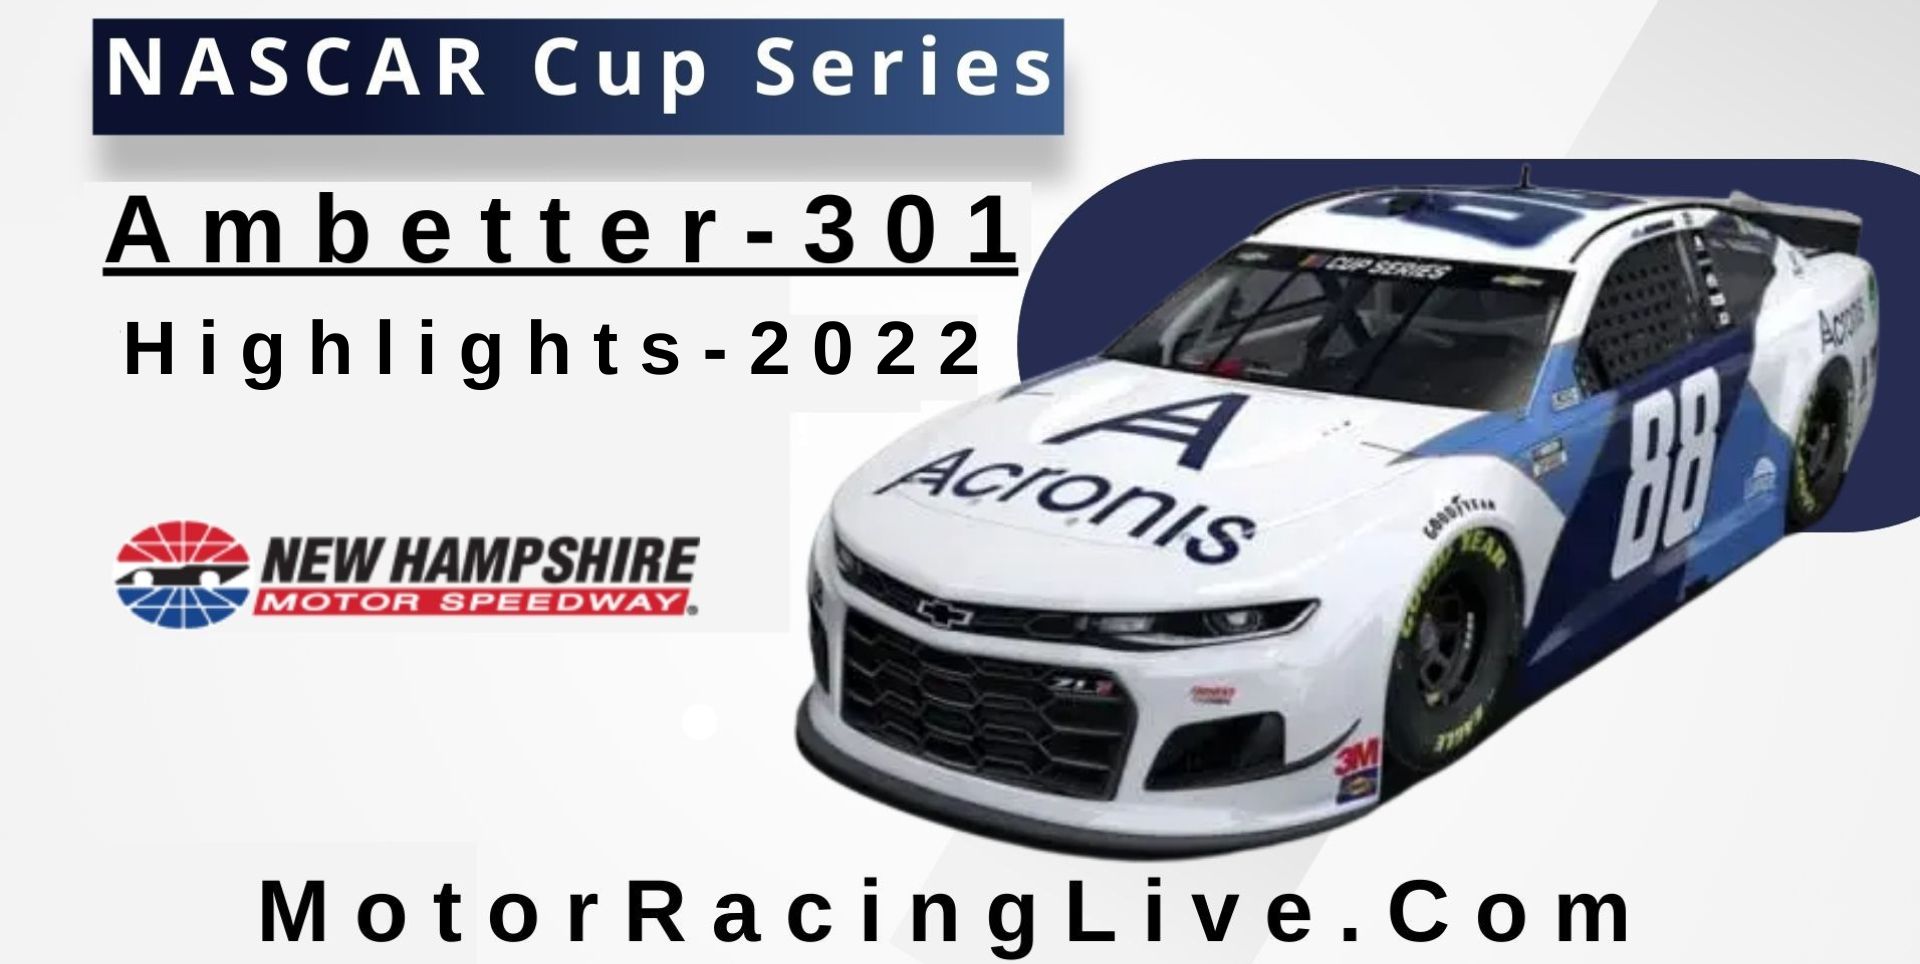 Ambetter 301 Highlights 2022 NASCAR Cup Series